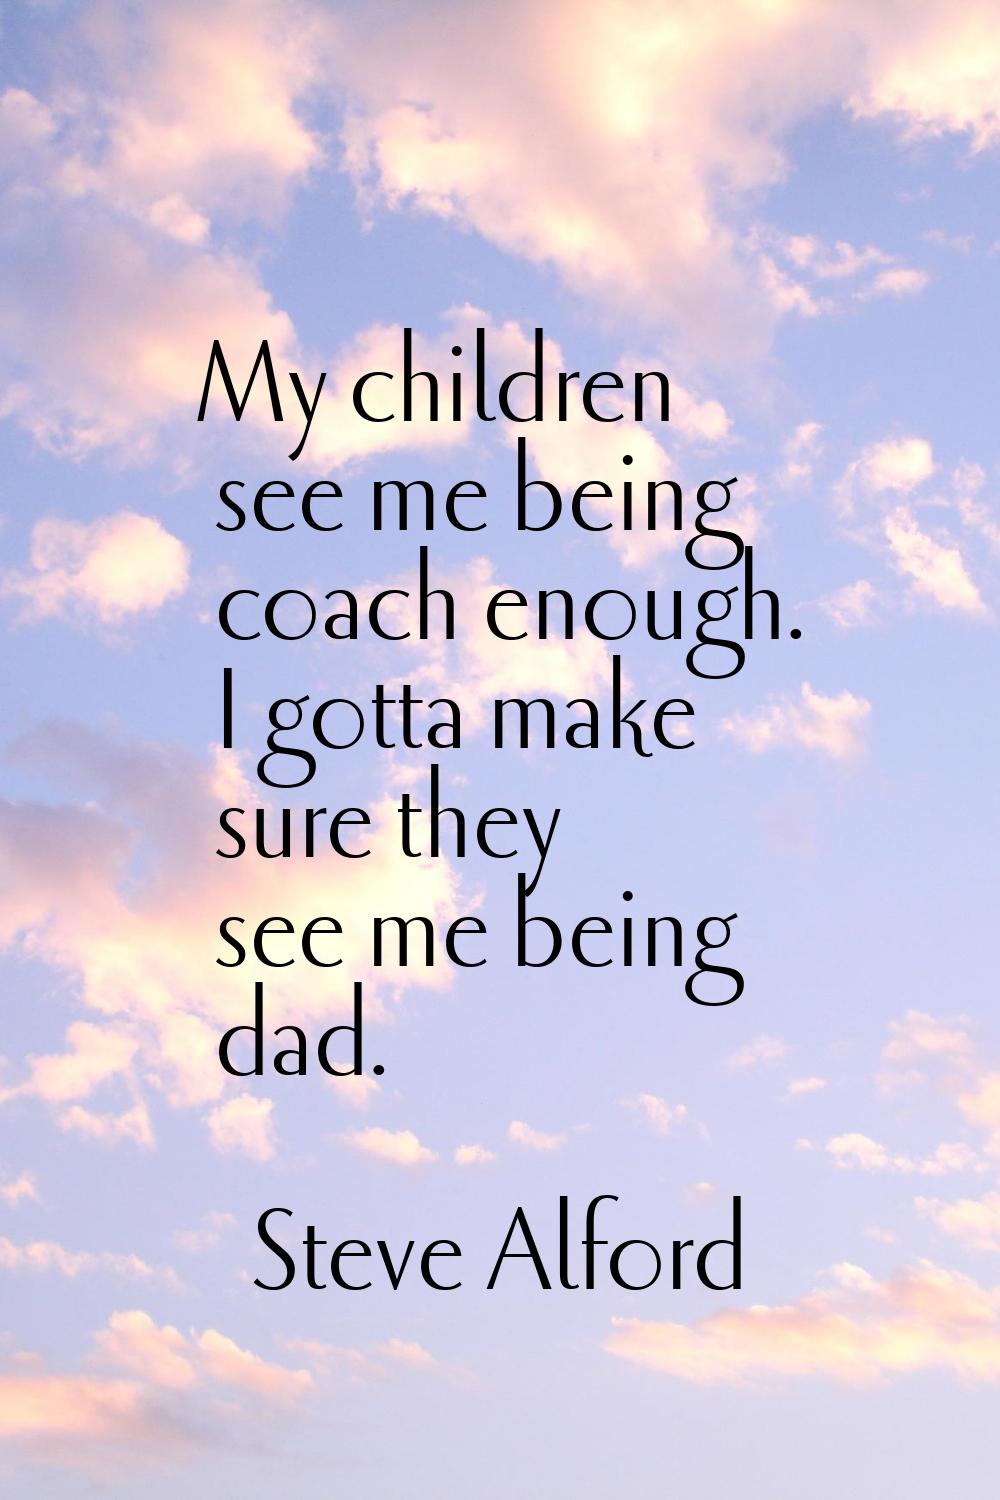 My children see me being coach enough. I gotta make sure they see me being dad.